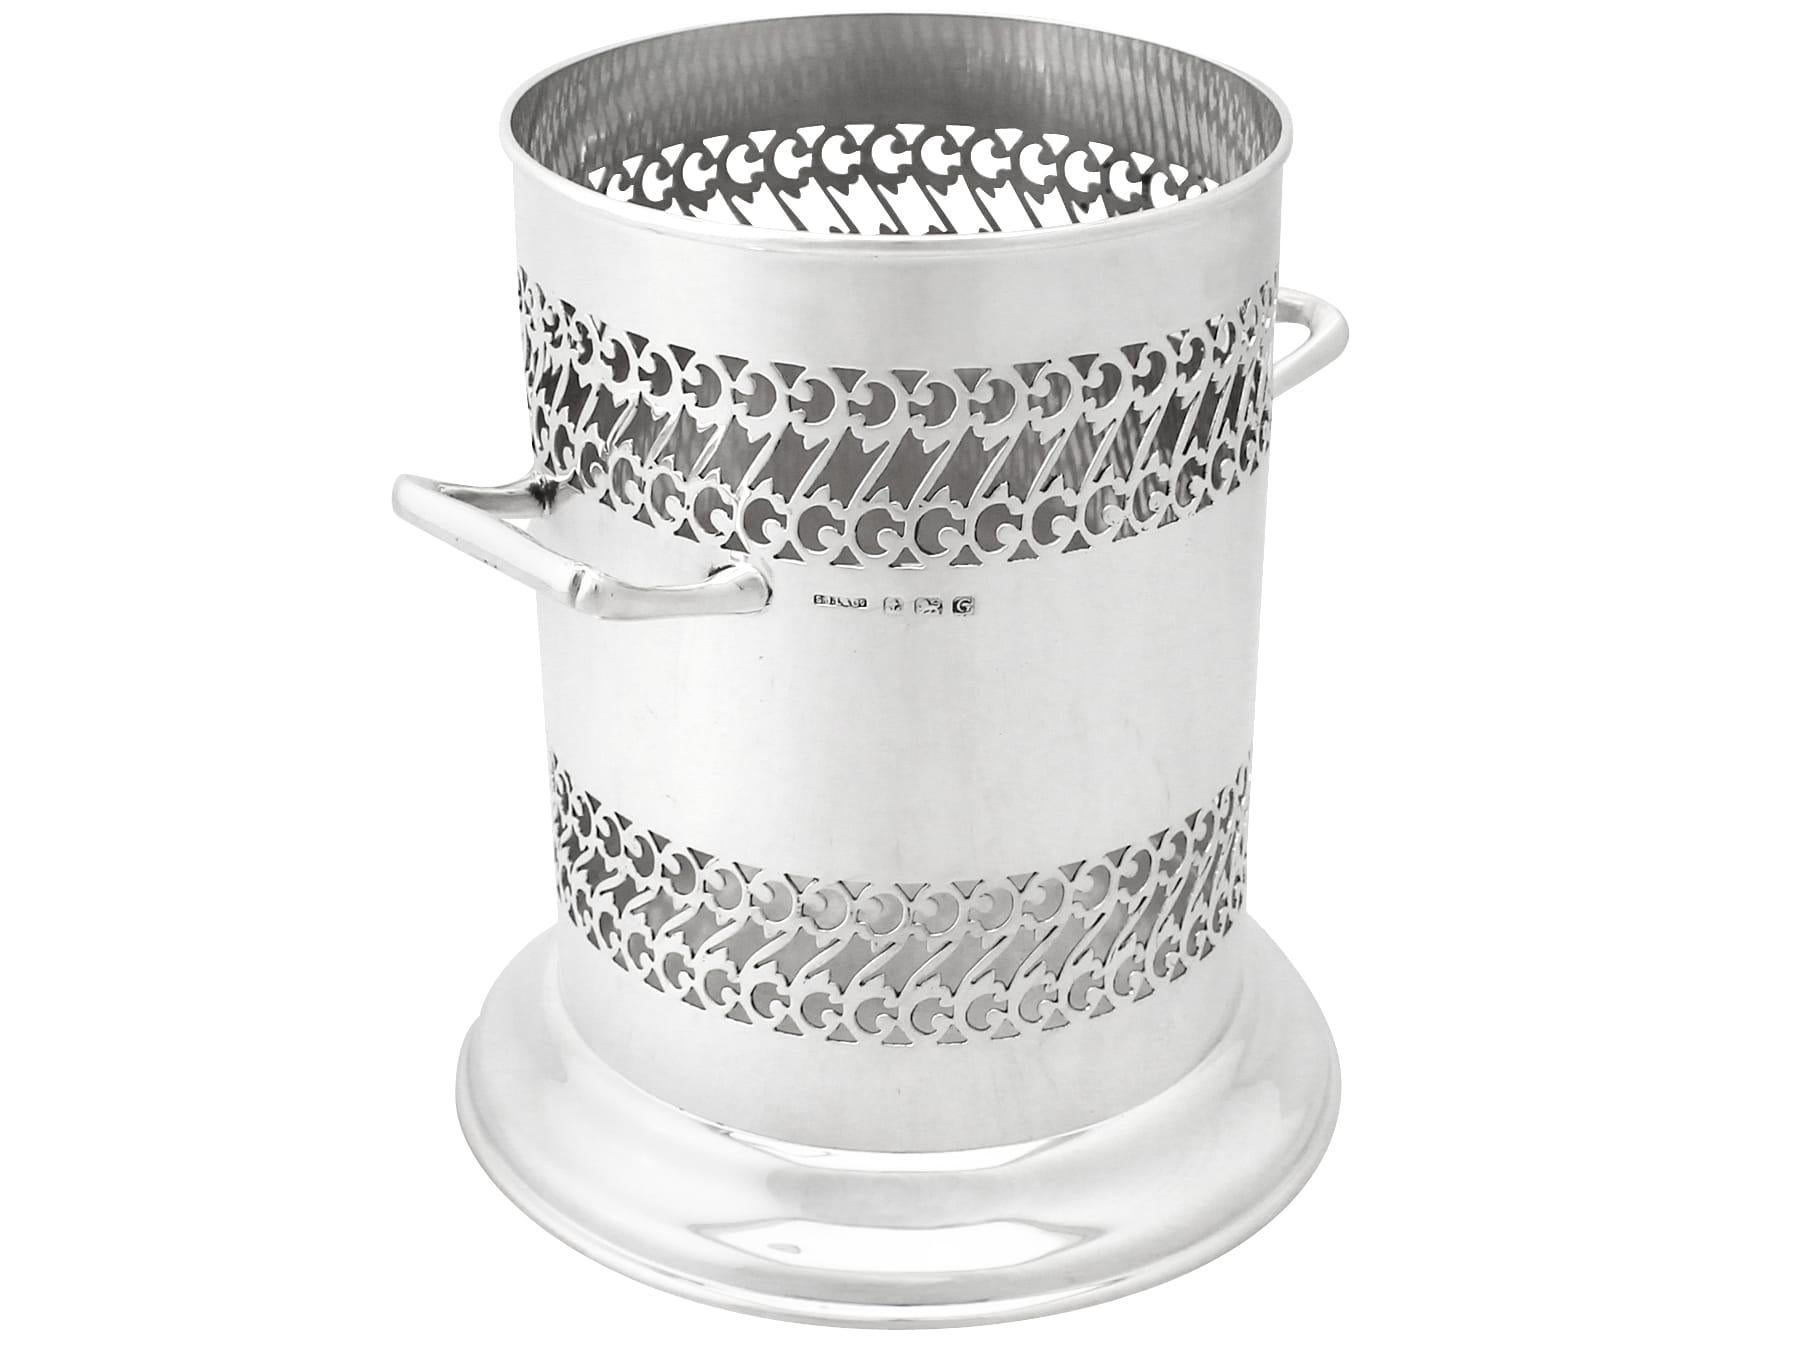 A fine and impressive antique George V English sterling silver bottle coaster, an addition to our ornamental silverware collection.

This impressive antique George V sterling silver bottle coaster has a plain cylindrical form to a domed spreading